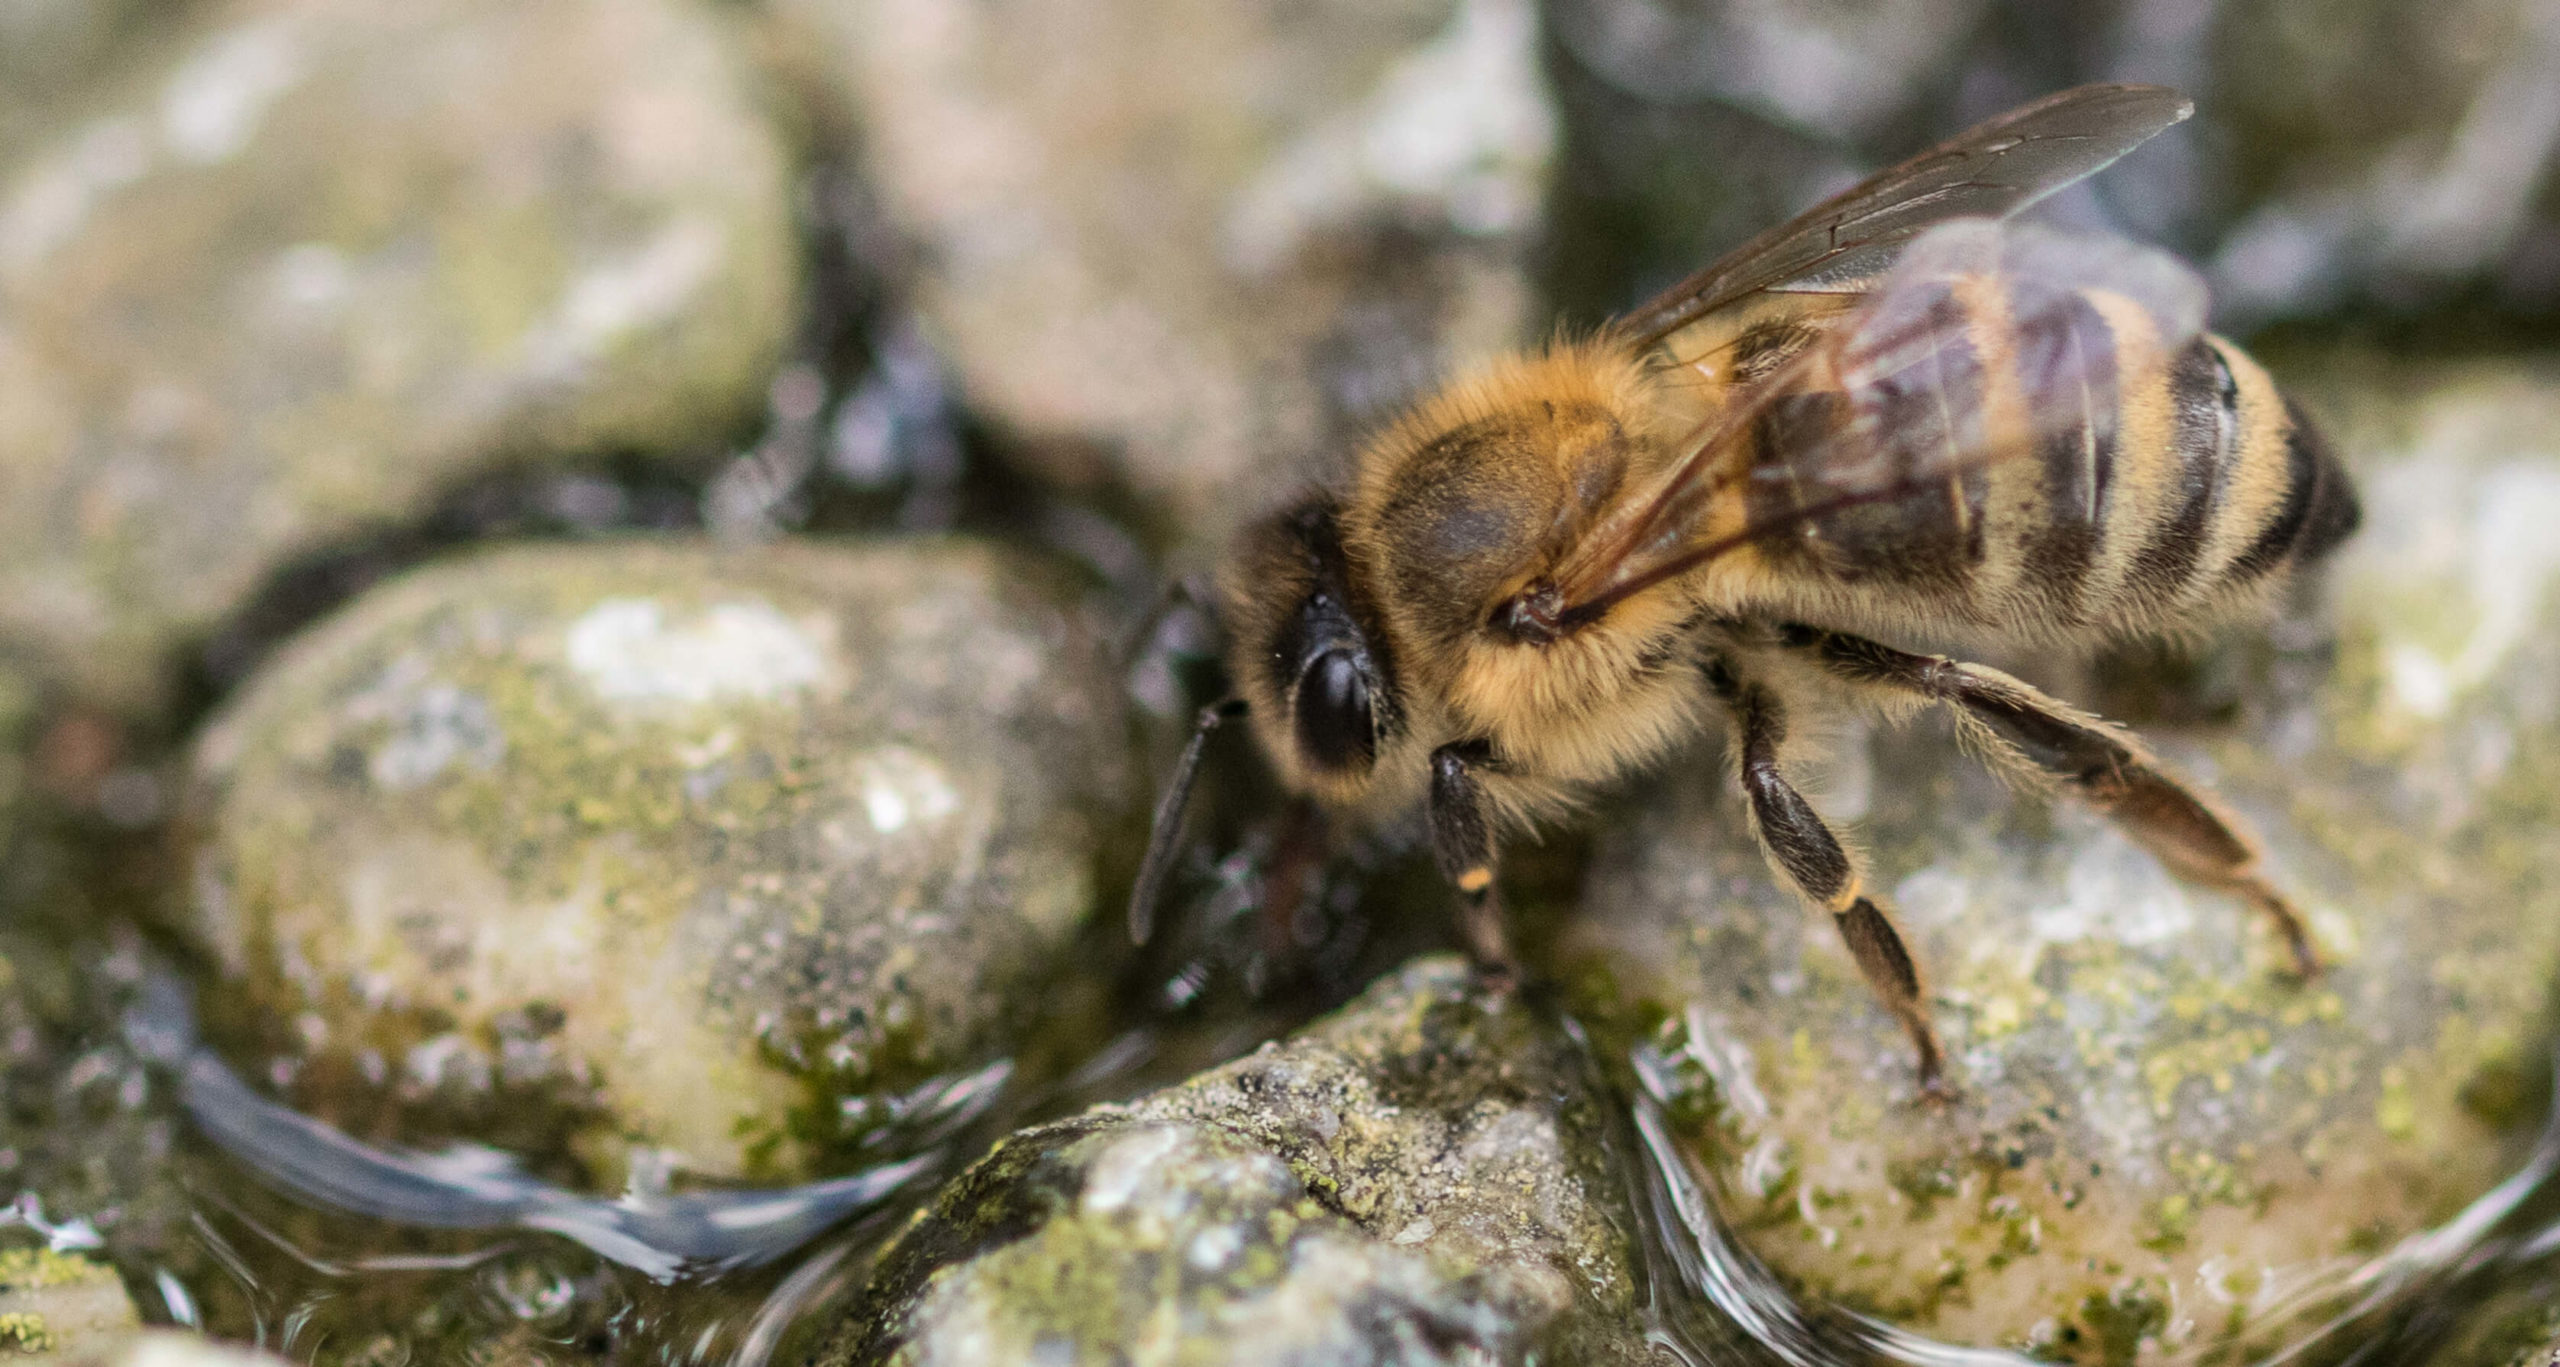 Image shows a honey bee drinking water from a bee bath